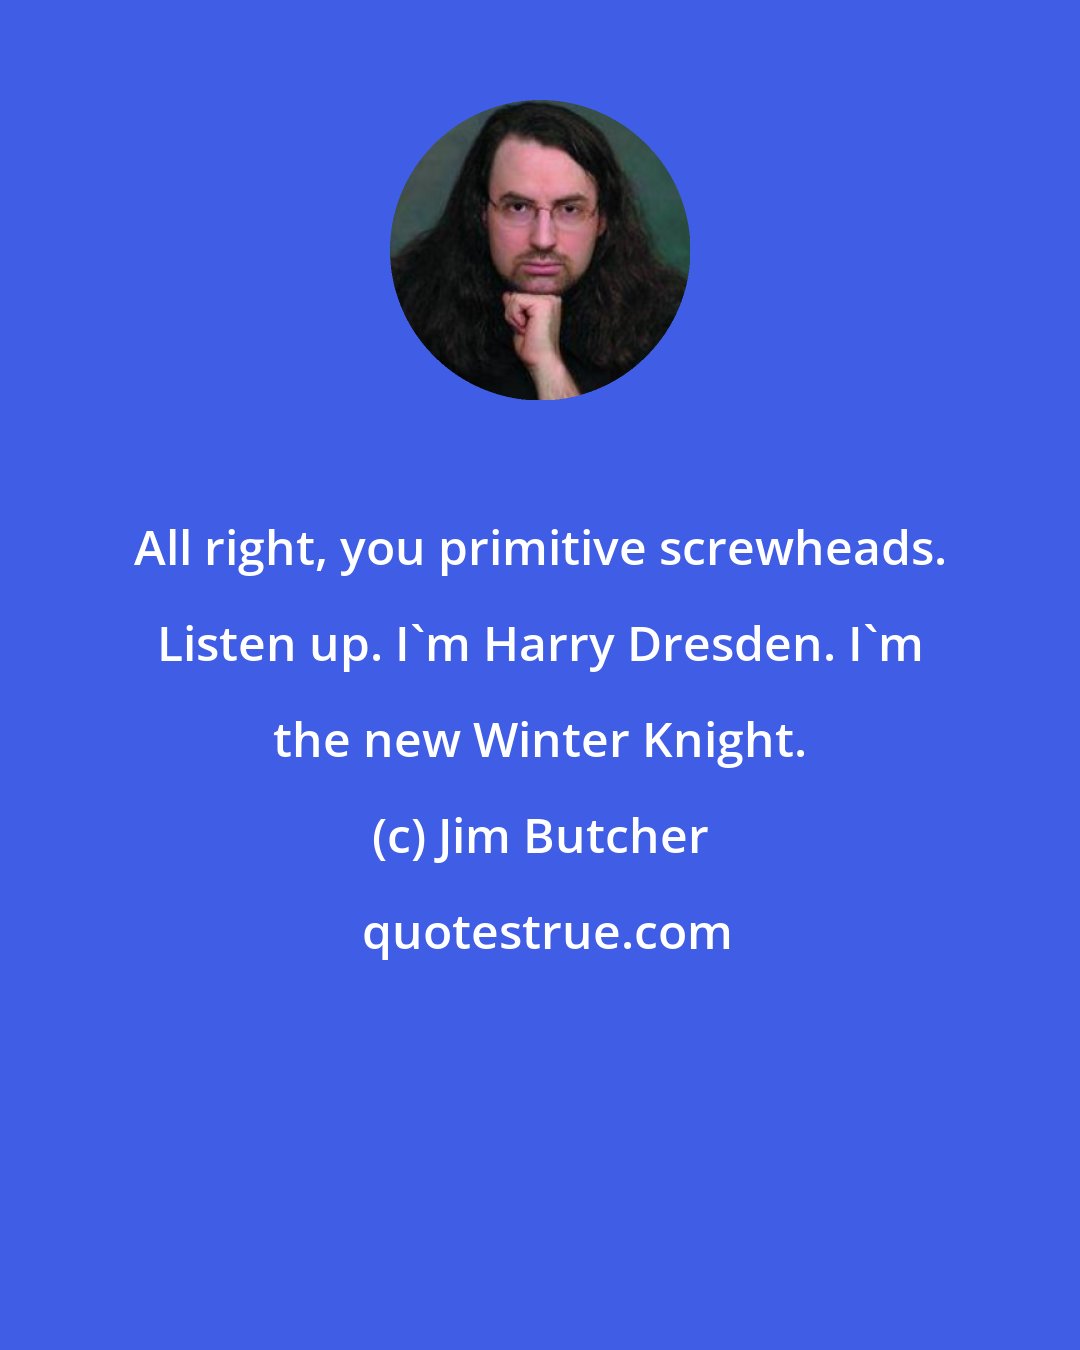 Jim Butcher: All right, you primitive screwheads. Listen up. I'm Harry Dresden. I'm the new Winter Knight.